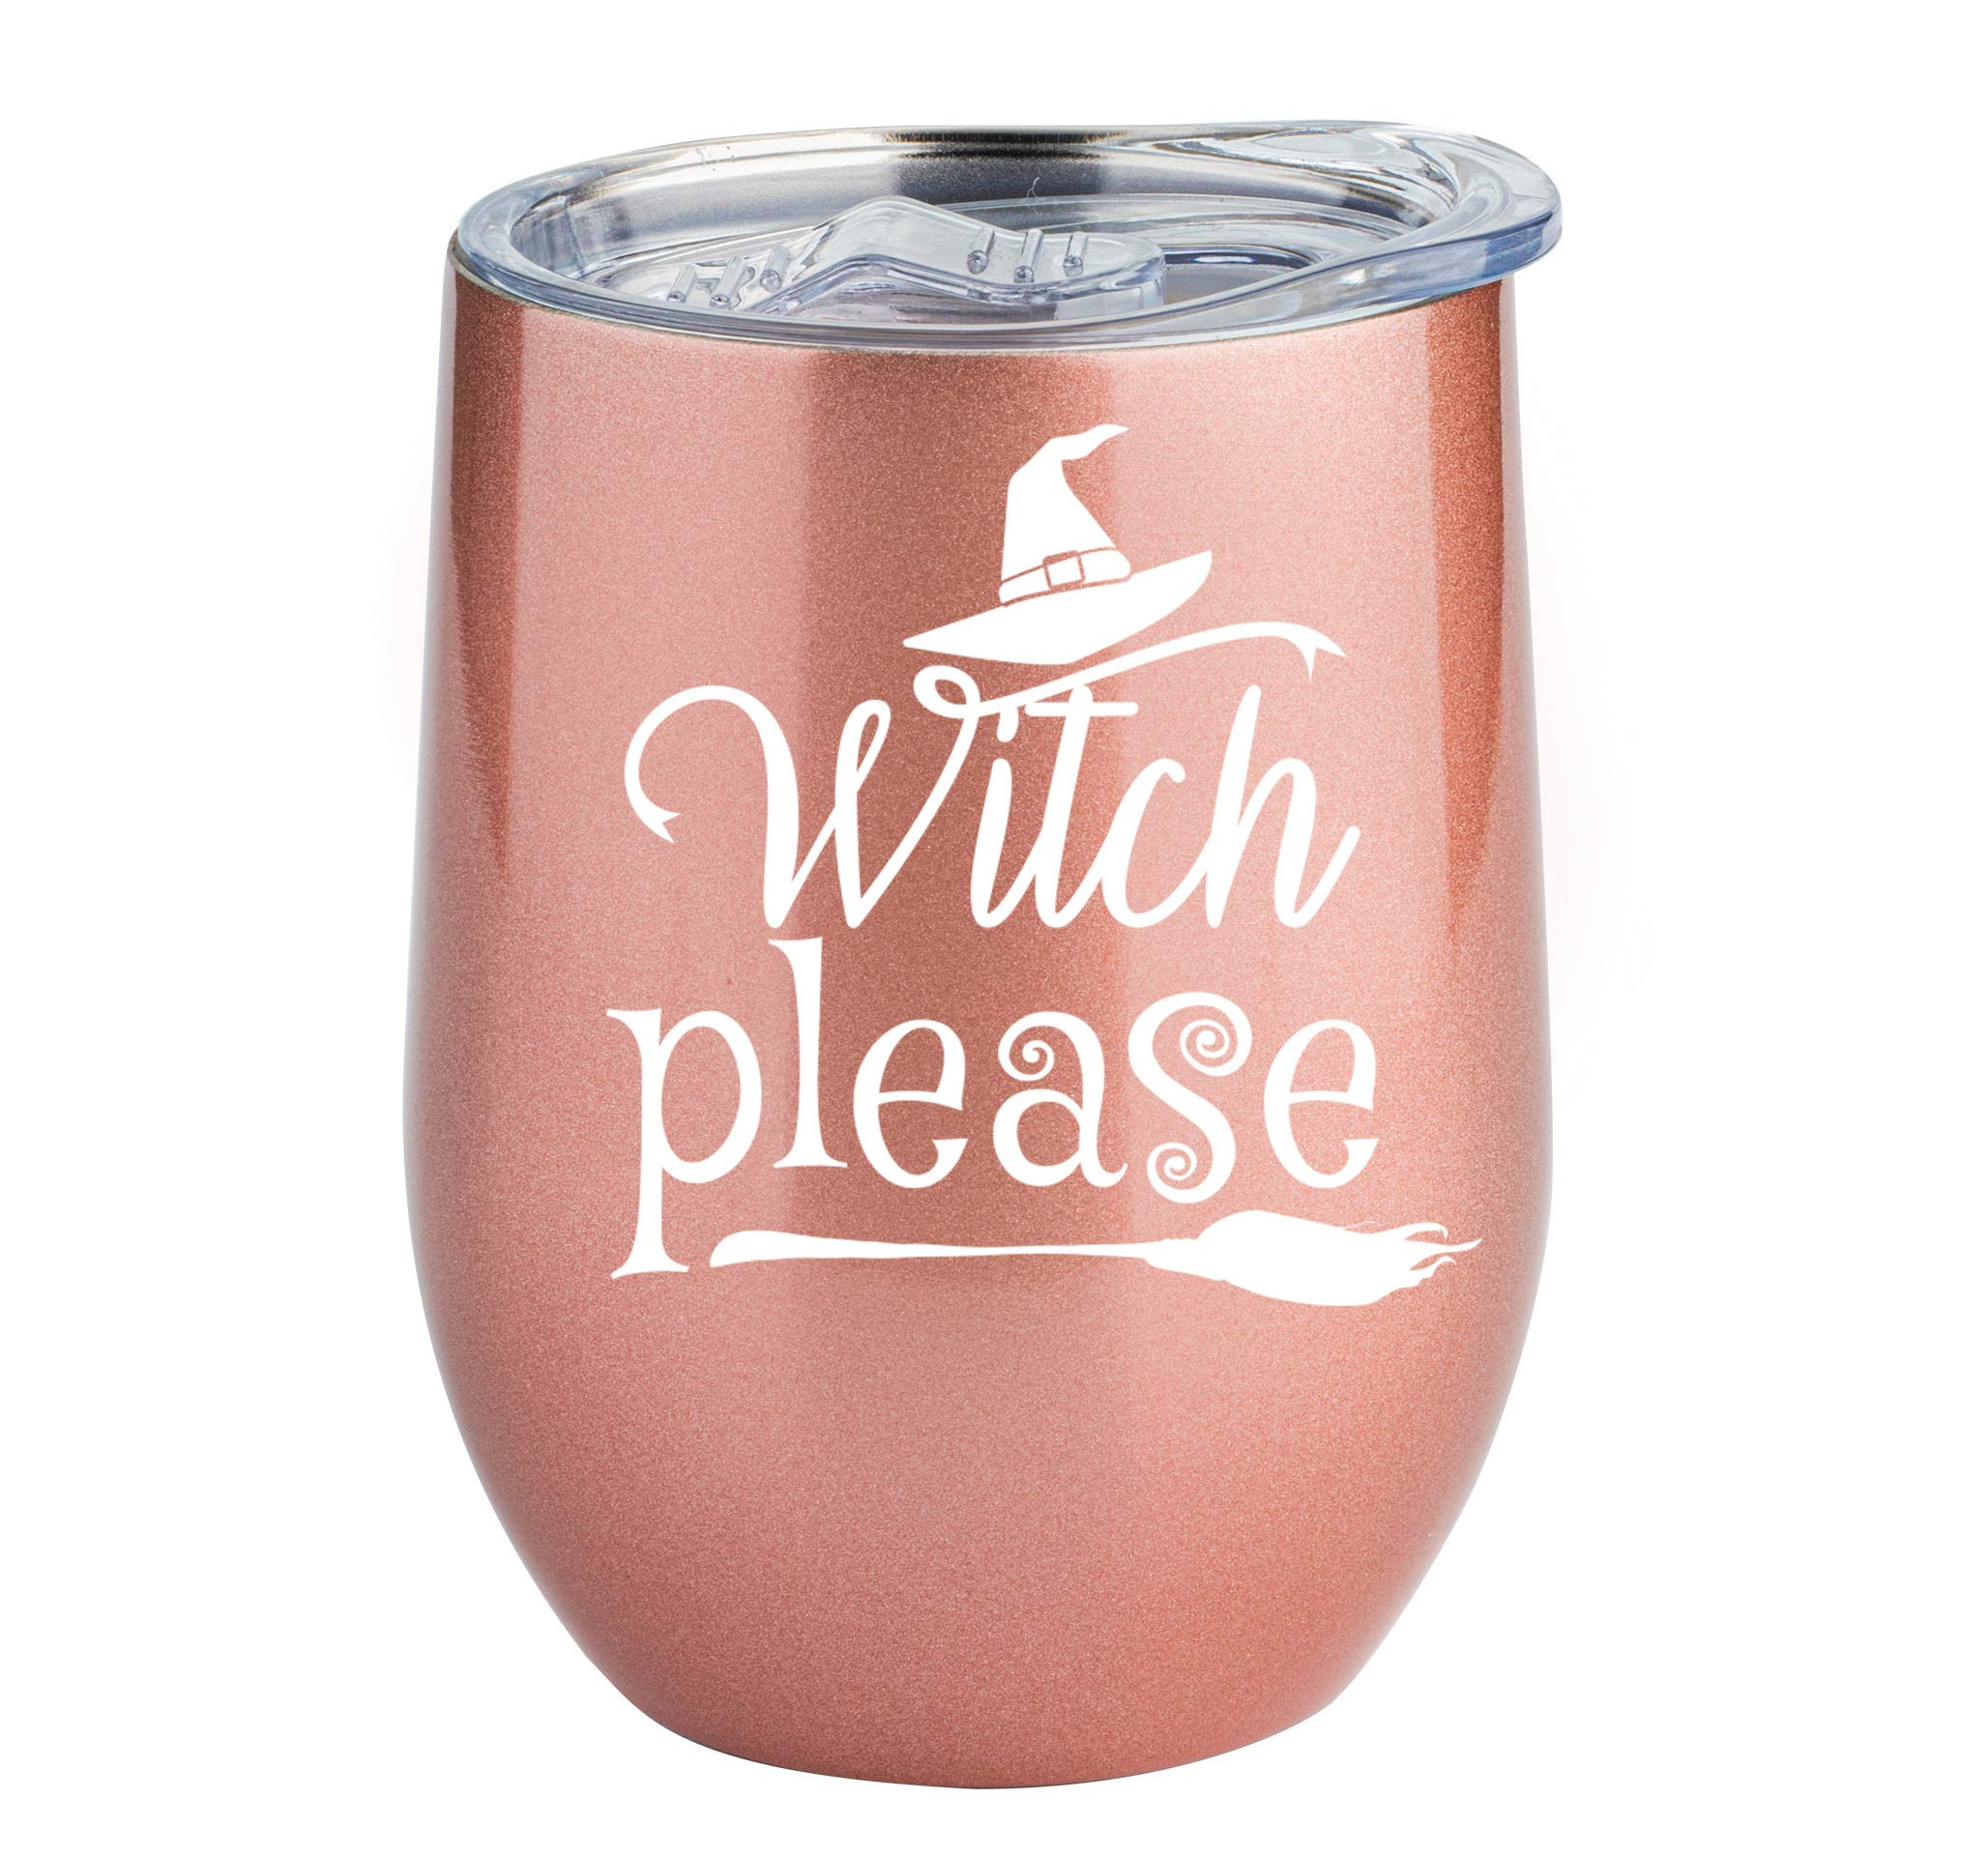 JENVIO Witchy Gifts - Rose Gold Stainless Steel Wine Tumbler/Mug with Lid and Straw - Witch Room Decor for Witchcraft Women Wicca Gothic Brew Village Glass Cup Please Broomstick Valentine's Day